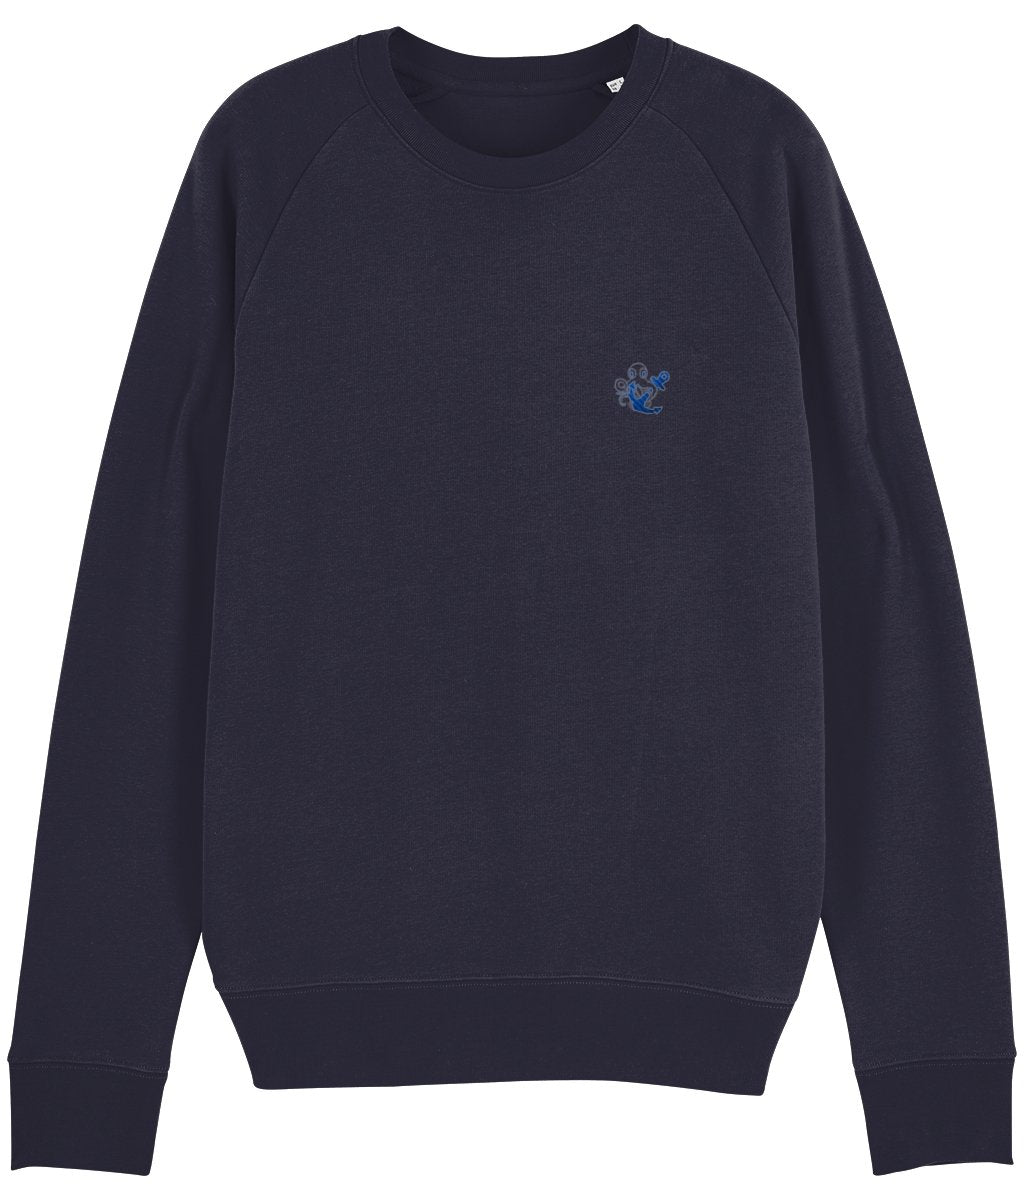 Chits Inn Embroidered Jumper - The Chits Inn